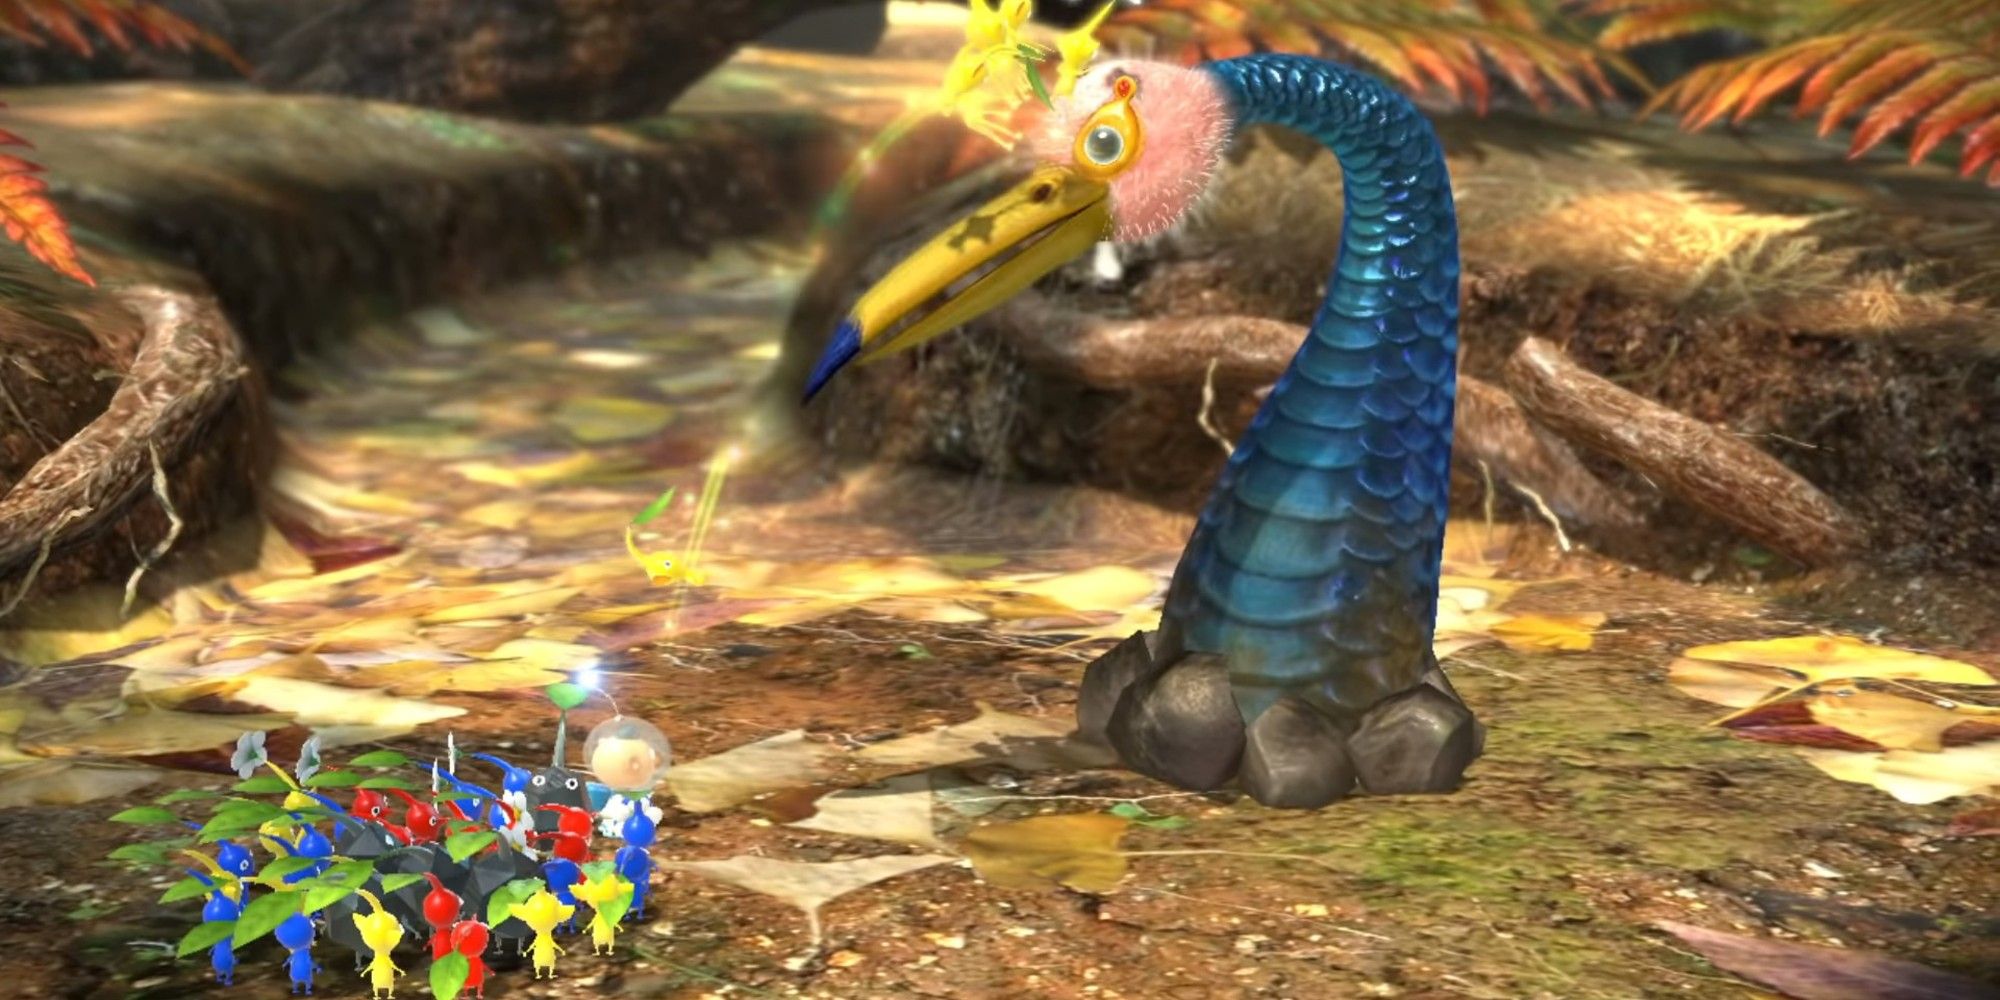 all the pikmin working together against a large boss battle in Pikmin 3